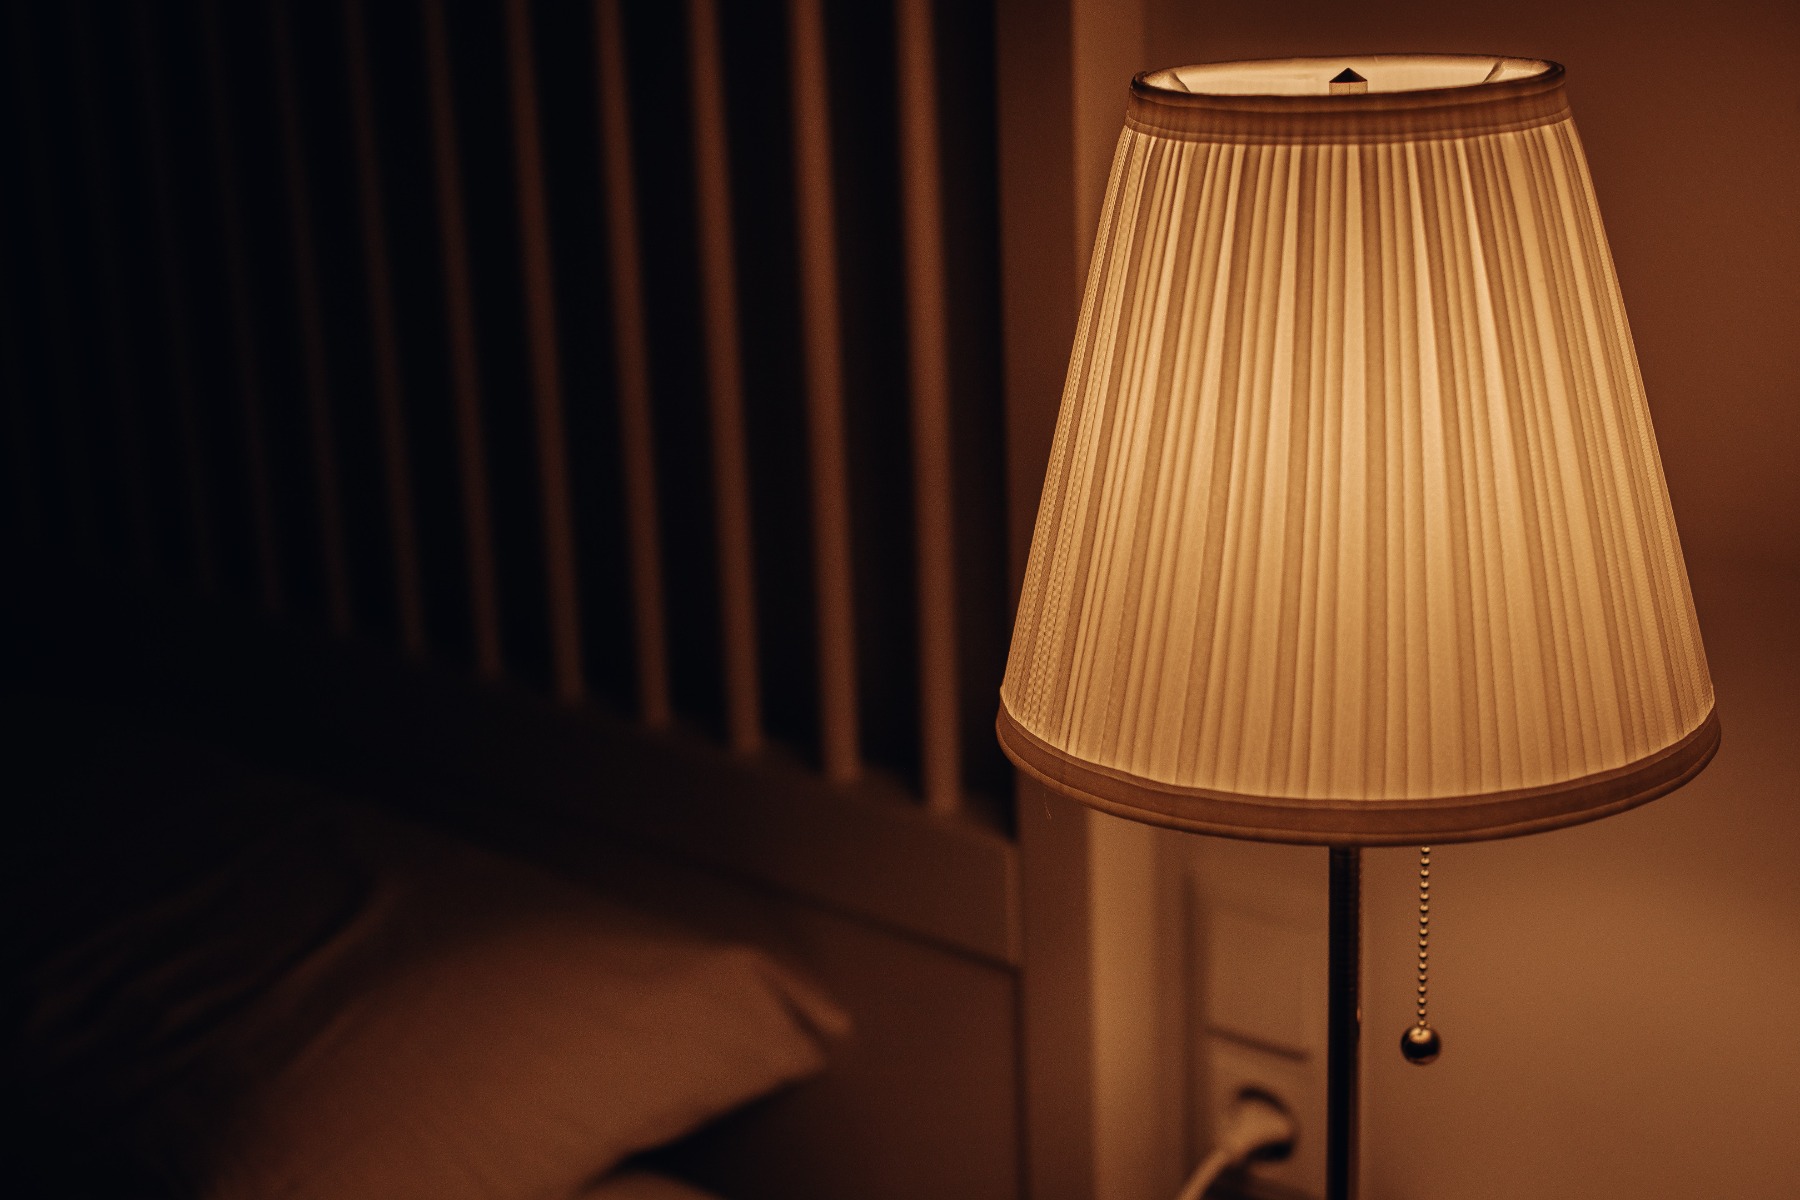 An image of a table lamp